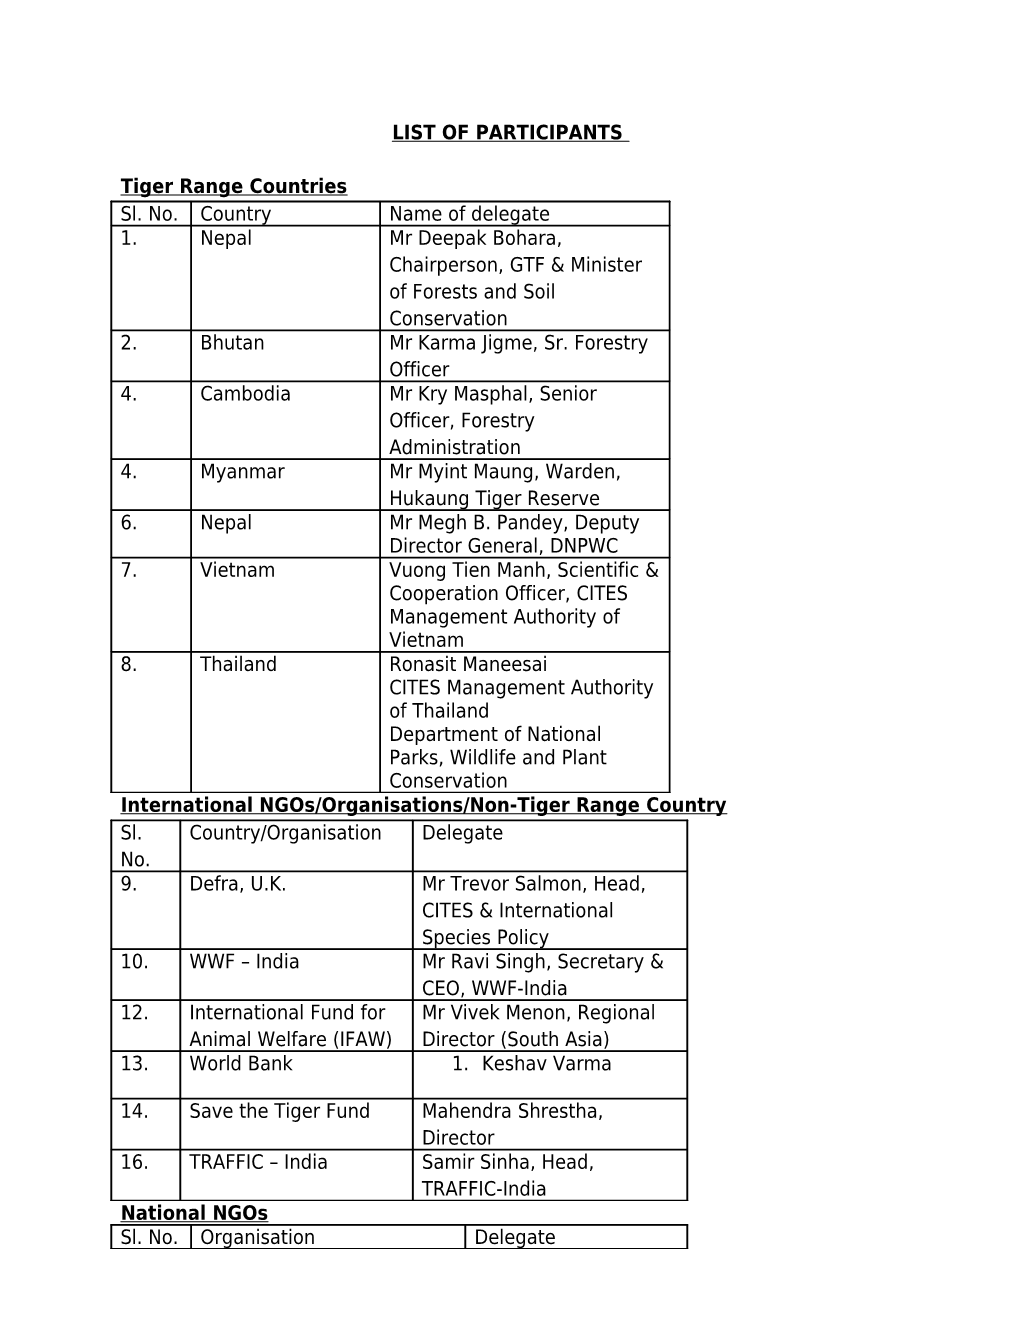 LIST of PARTICIPANTS to the GTF CONSULTATIVE MEETING on 28Th & 29Th JUNE 2010